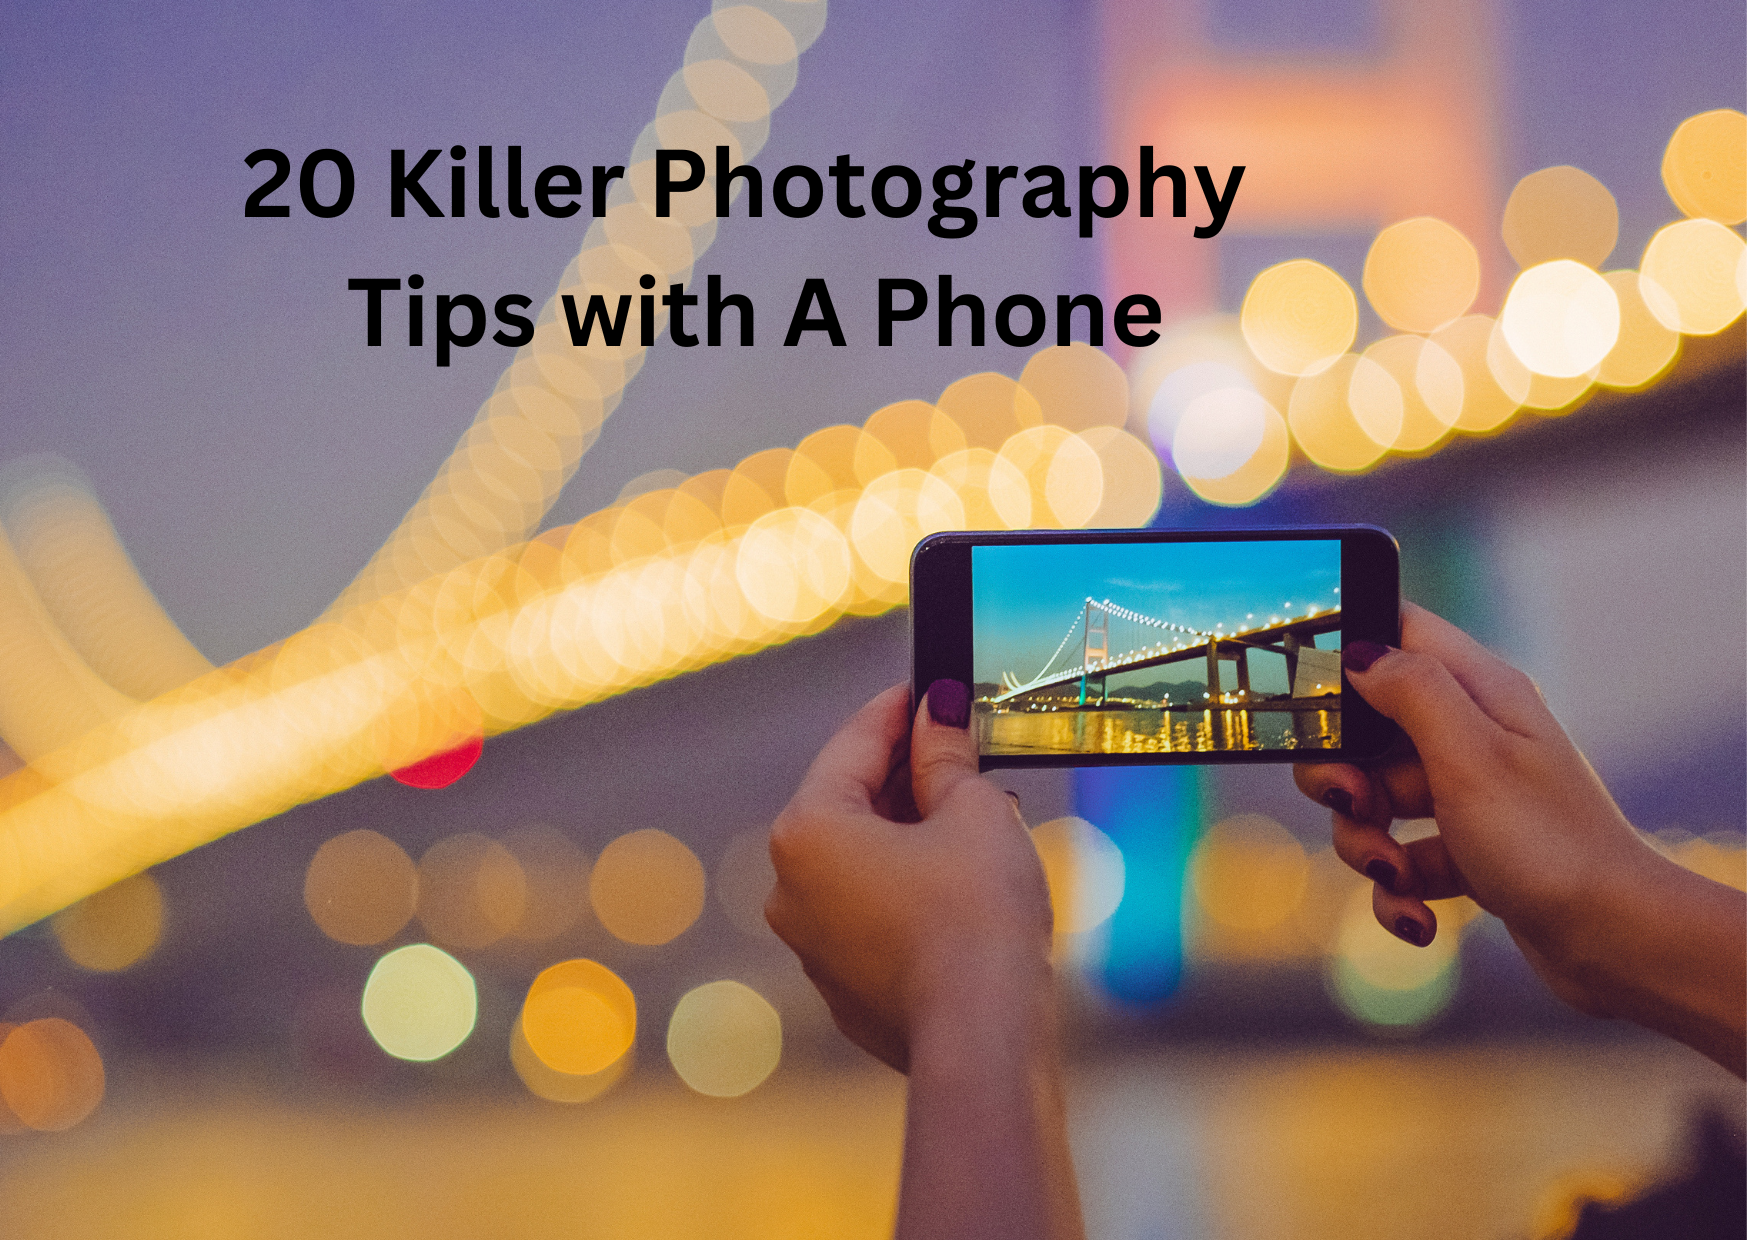 Photography tips with a phone